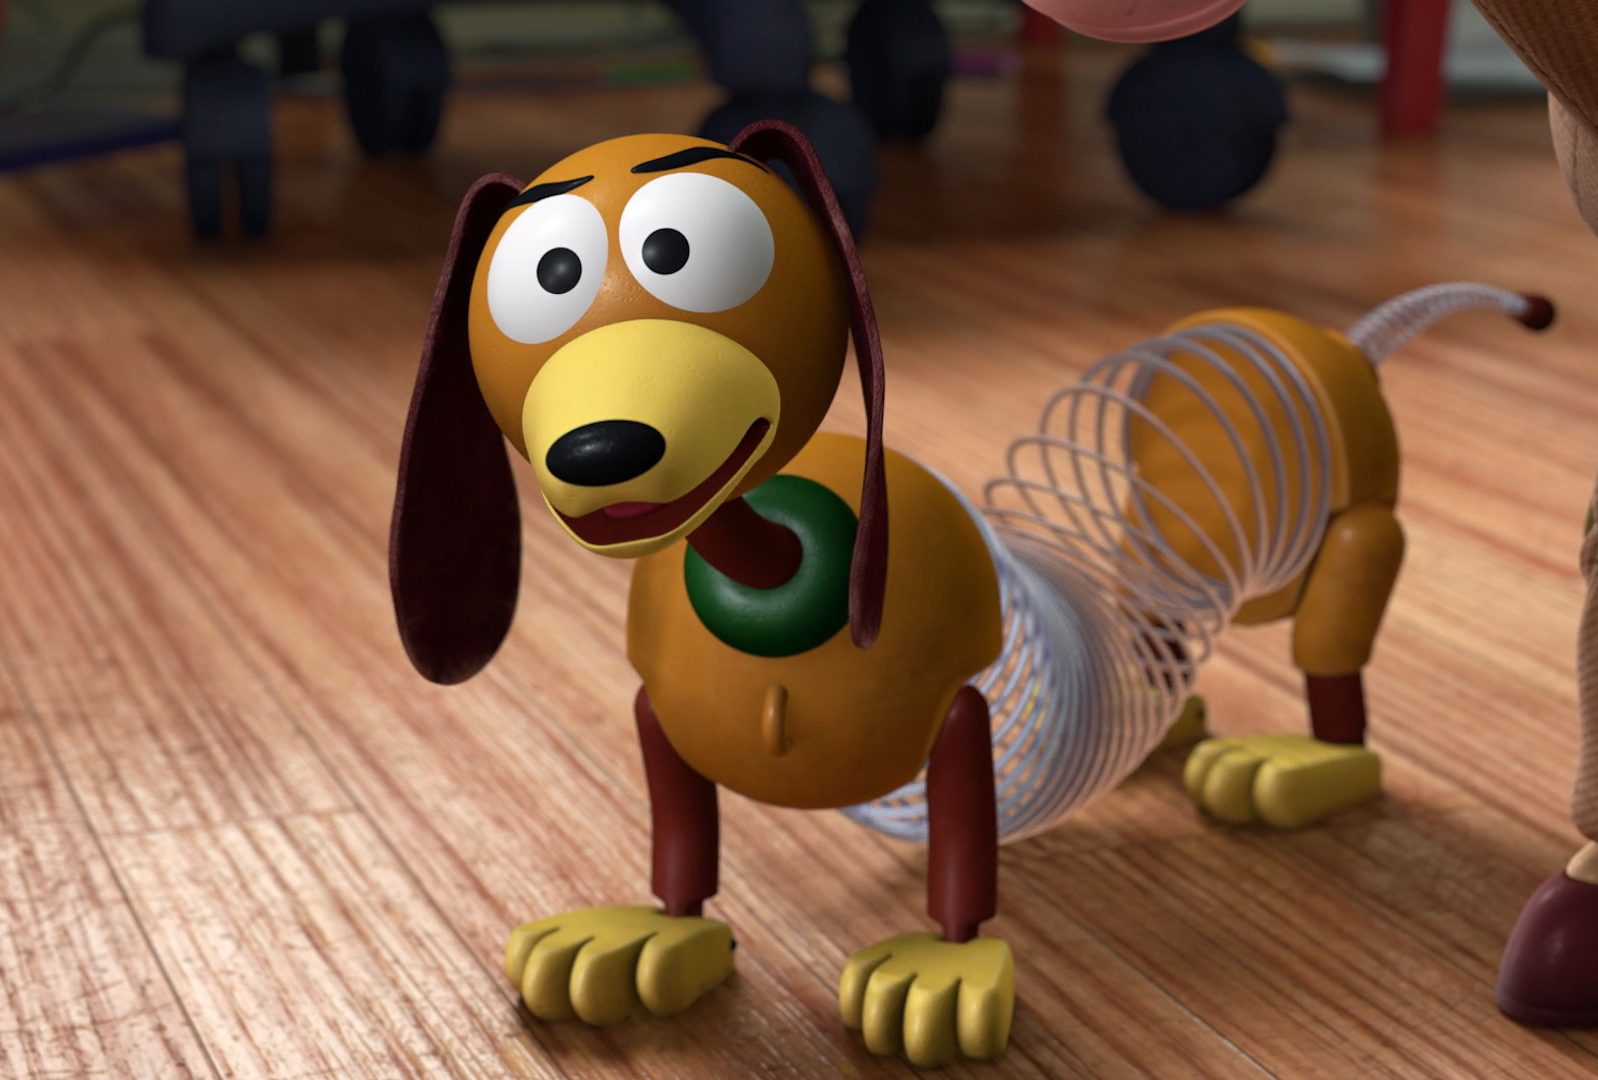 Do You Know the Names of These Toys from “Toy Story”? slinky